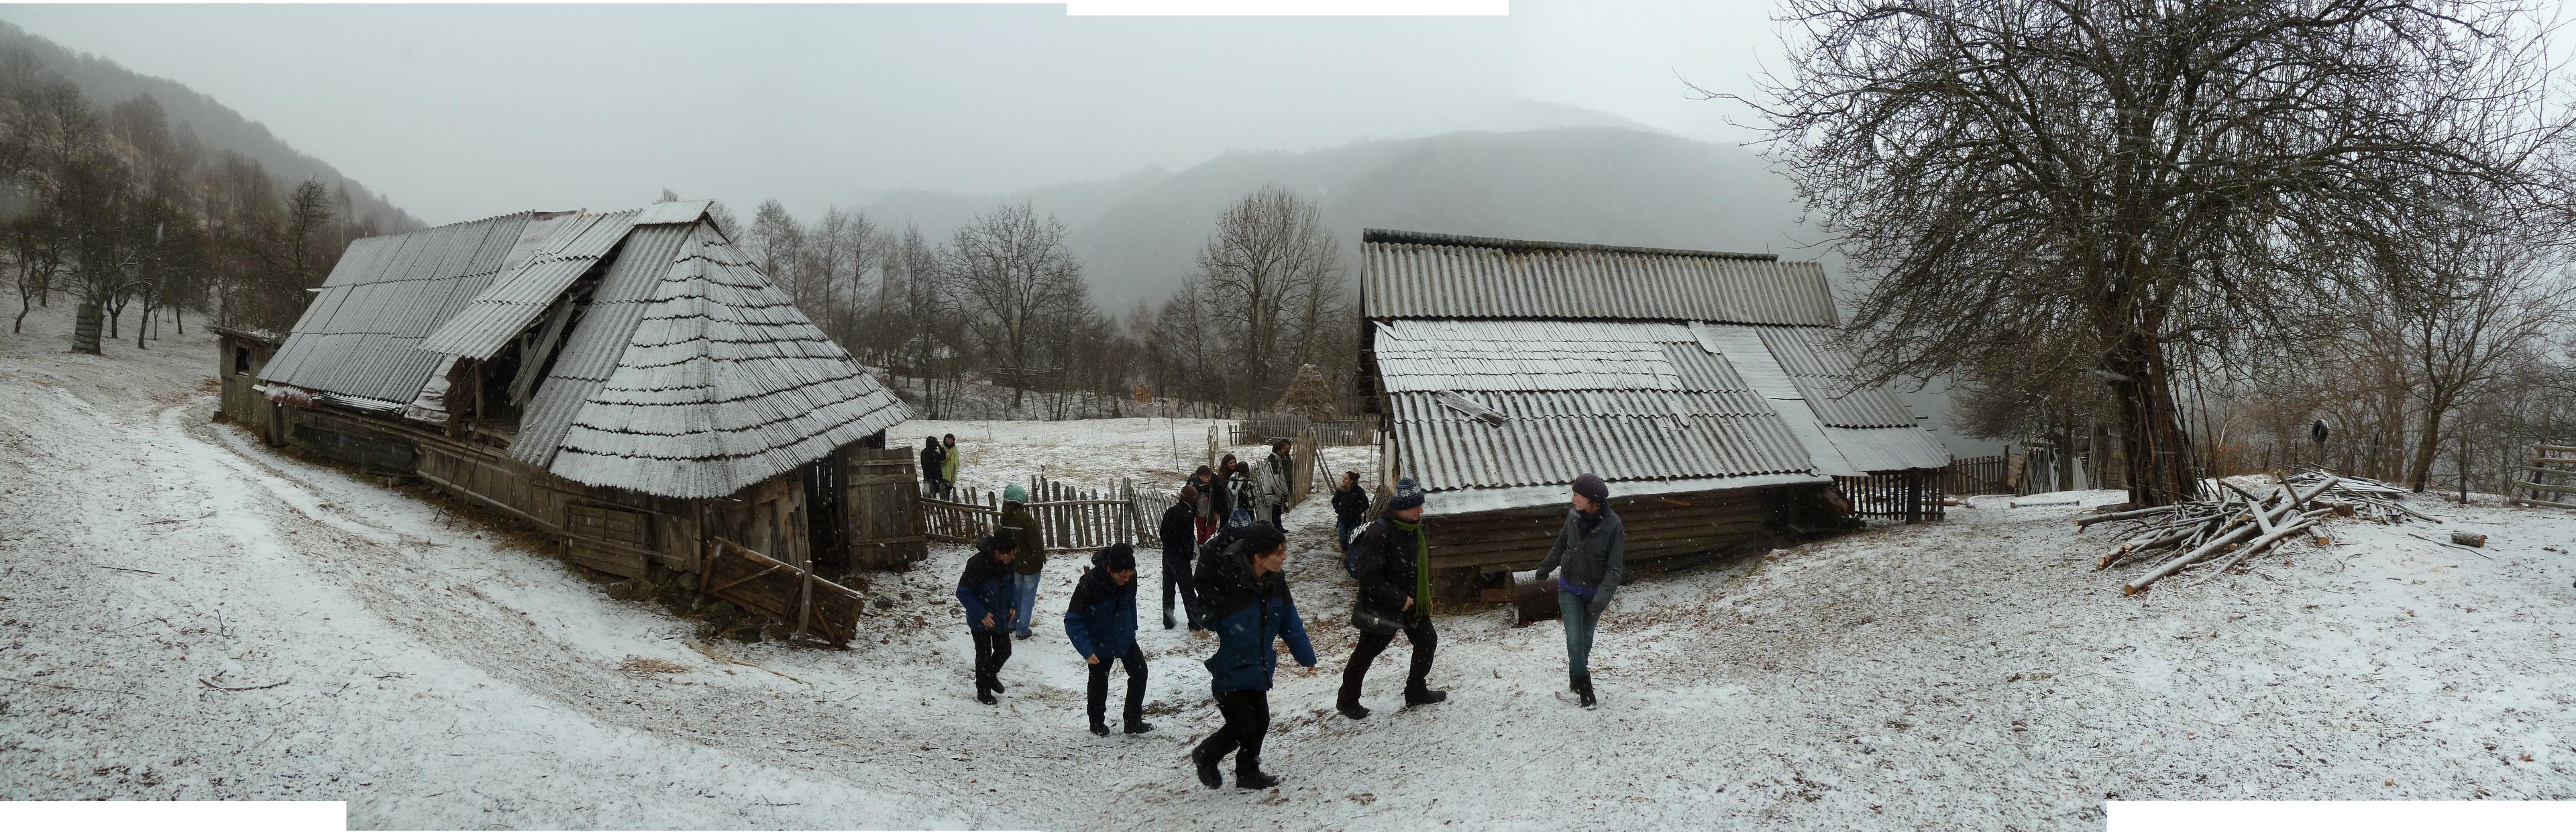 People walking outdoors in winter among country side houses